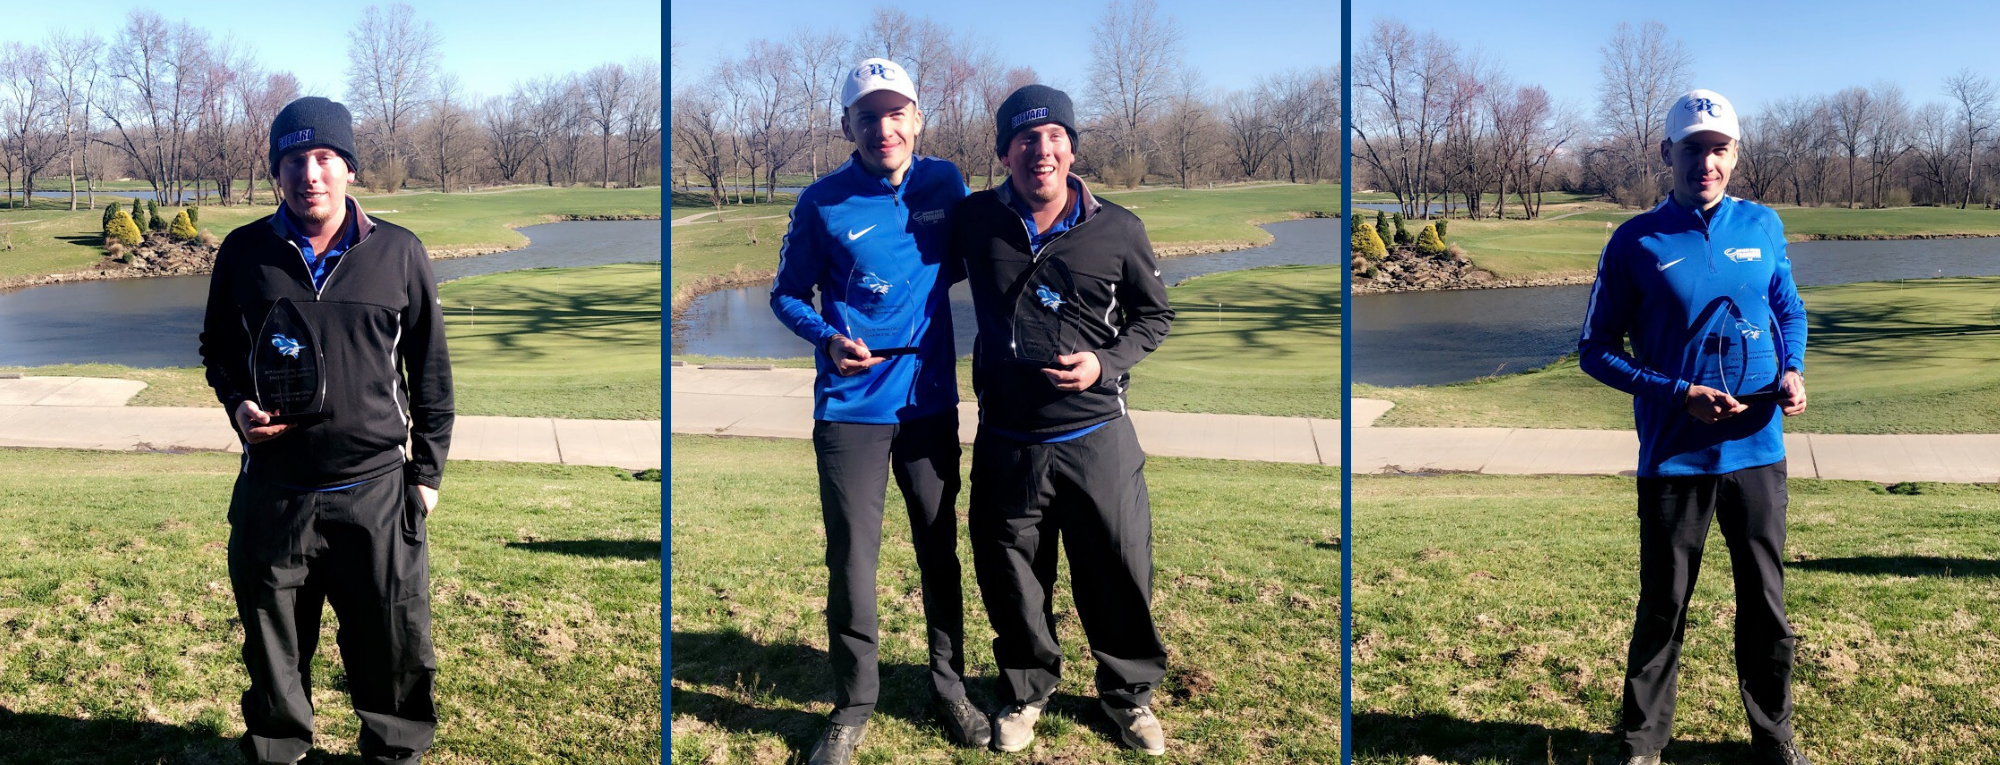 Brevard Garners Two Top-Three Finishes as Austin Fisher Wins, Thibault Tranchant Places Third in Cavalier Spring Invitational